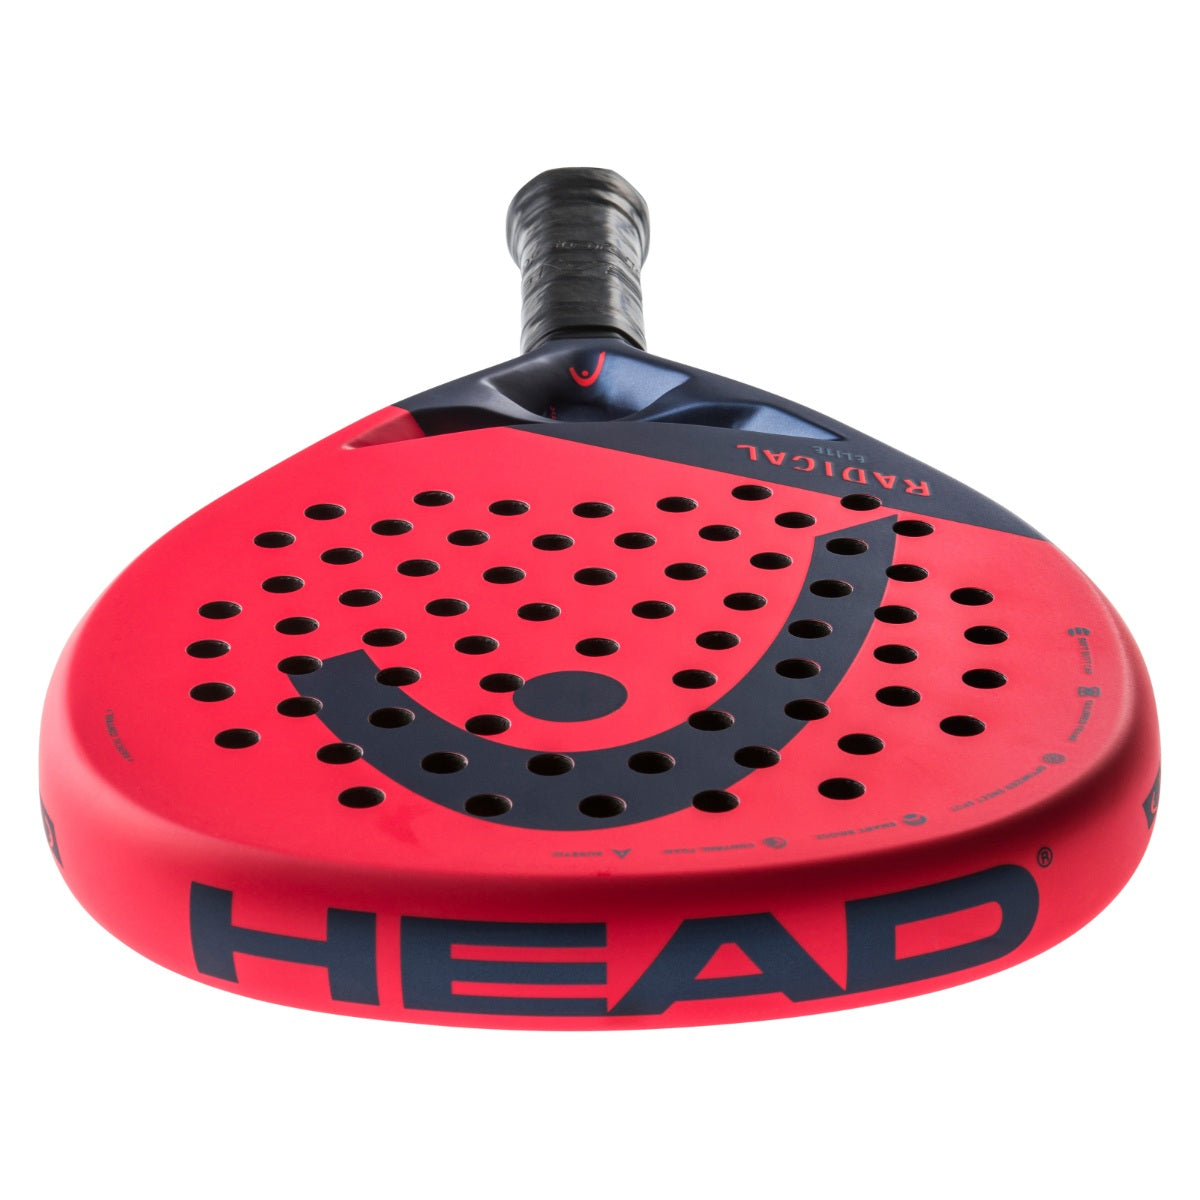 top image of Head Radical Elite Paddle Tennis racket available at thepadelshop.co.nz